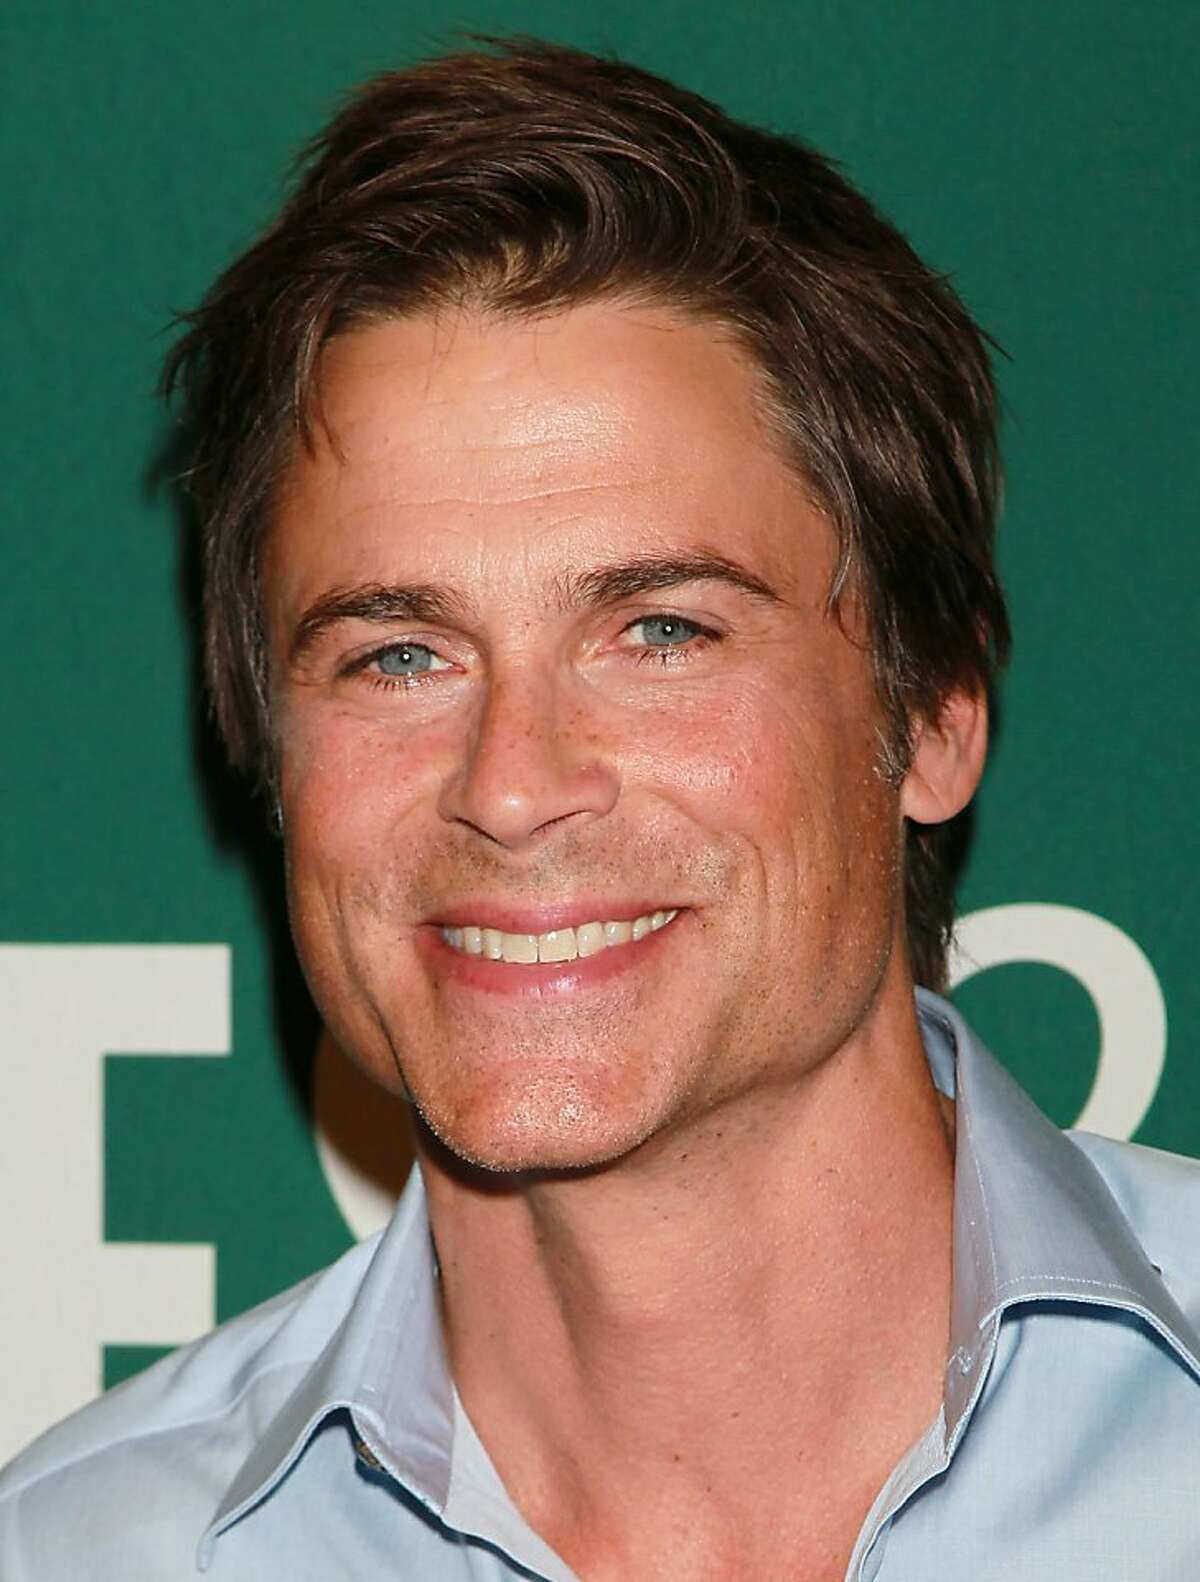 LOS ANGELES, CA - APRIL 29: Actor Rob Lowe attends a signing for his book "Stories I Only Tell My Friends" at Barnes & Noble Booksellers at The Grove on April 29, 2011 in Los Angeles, California.